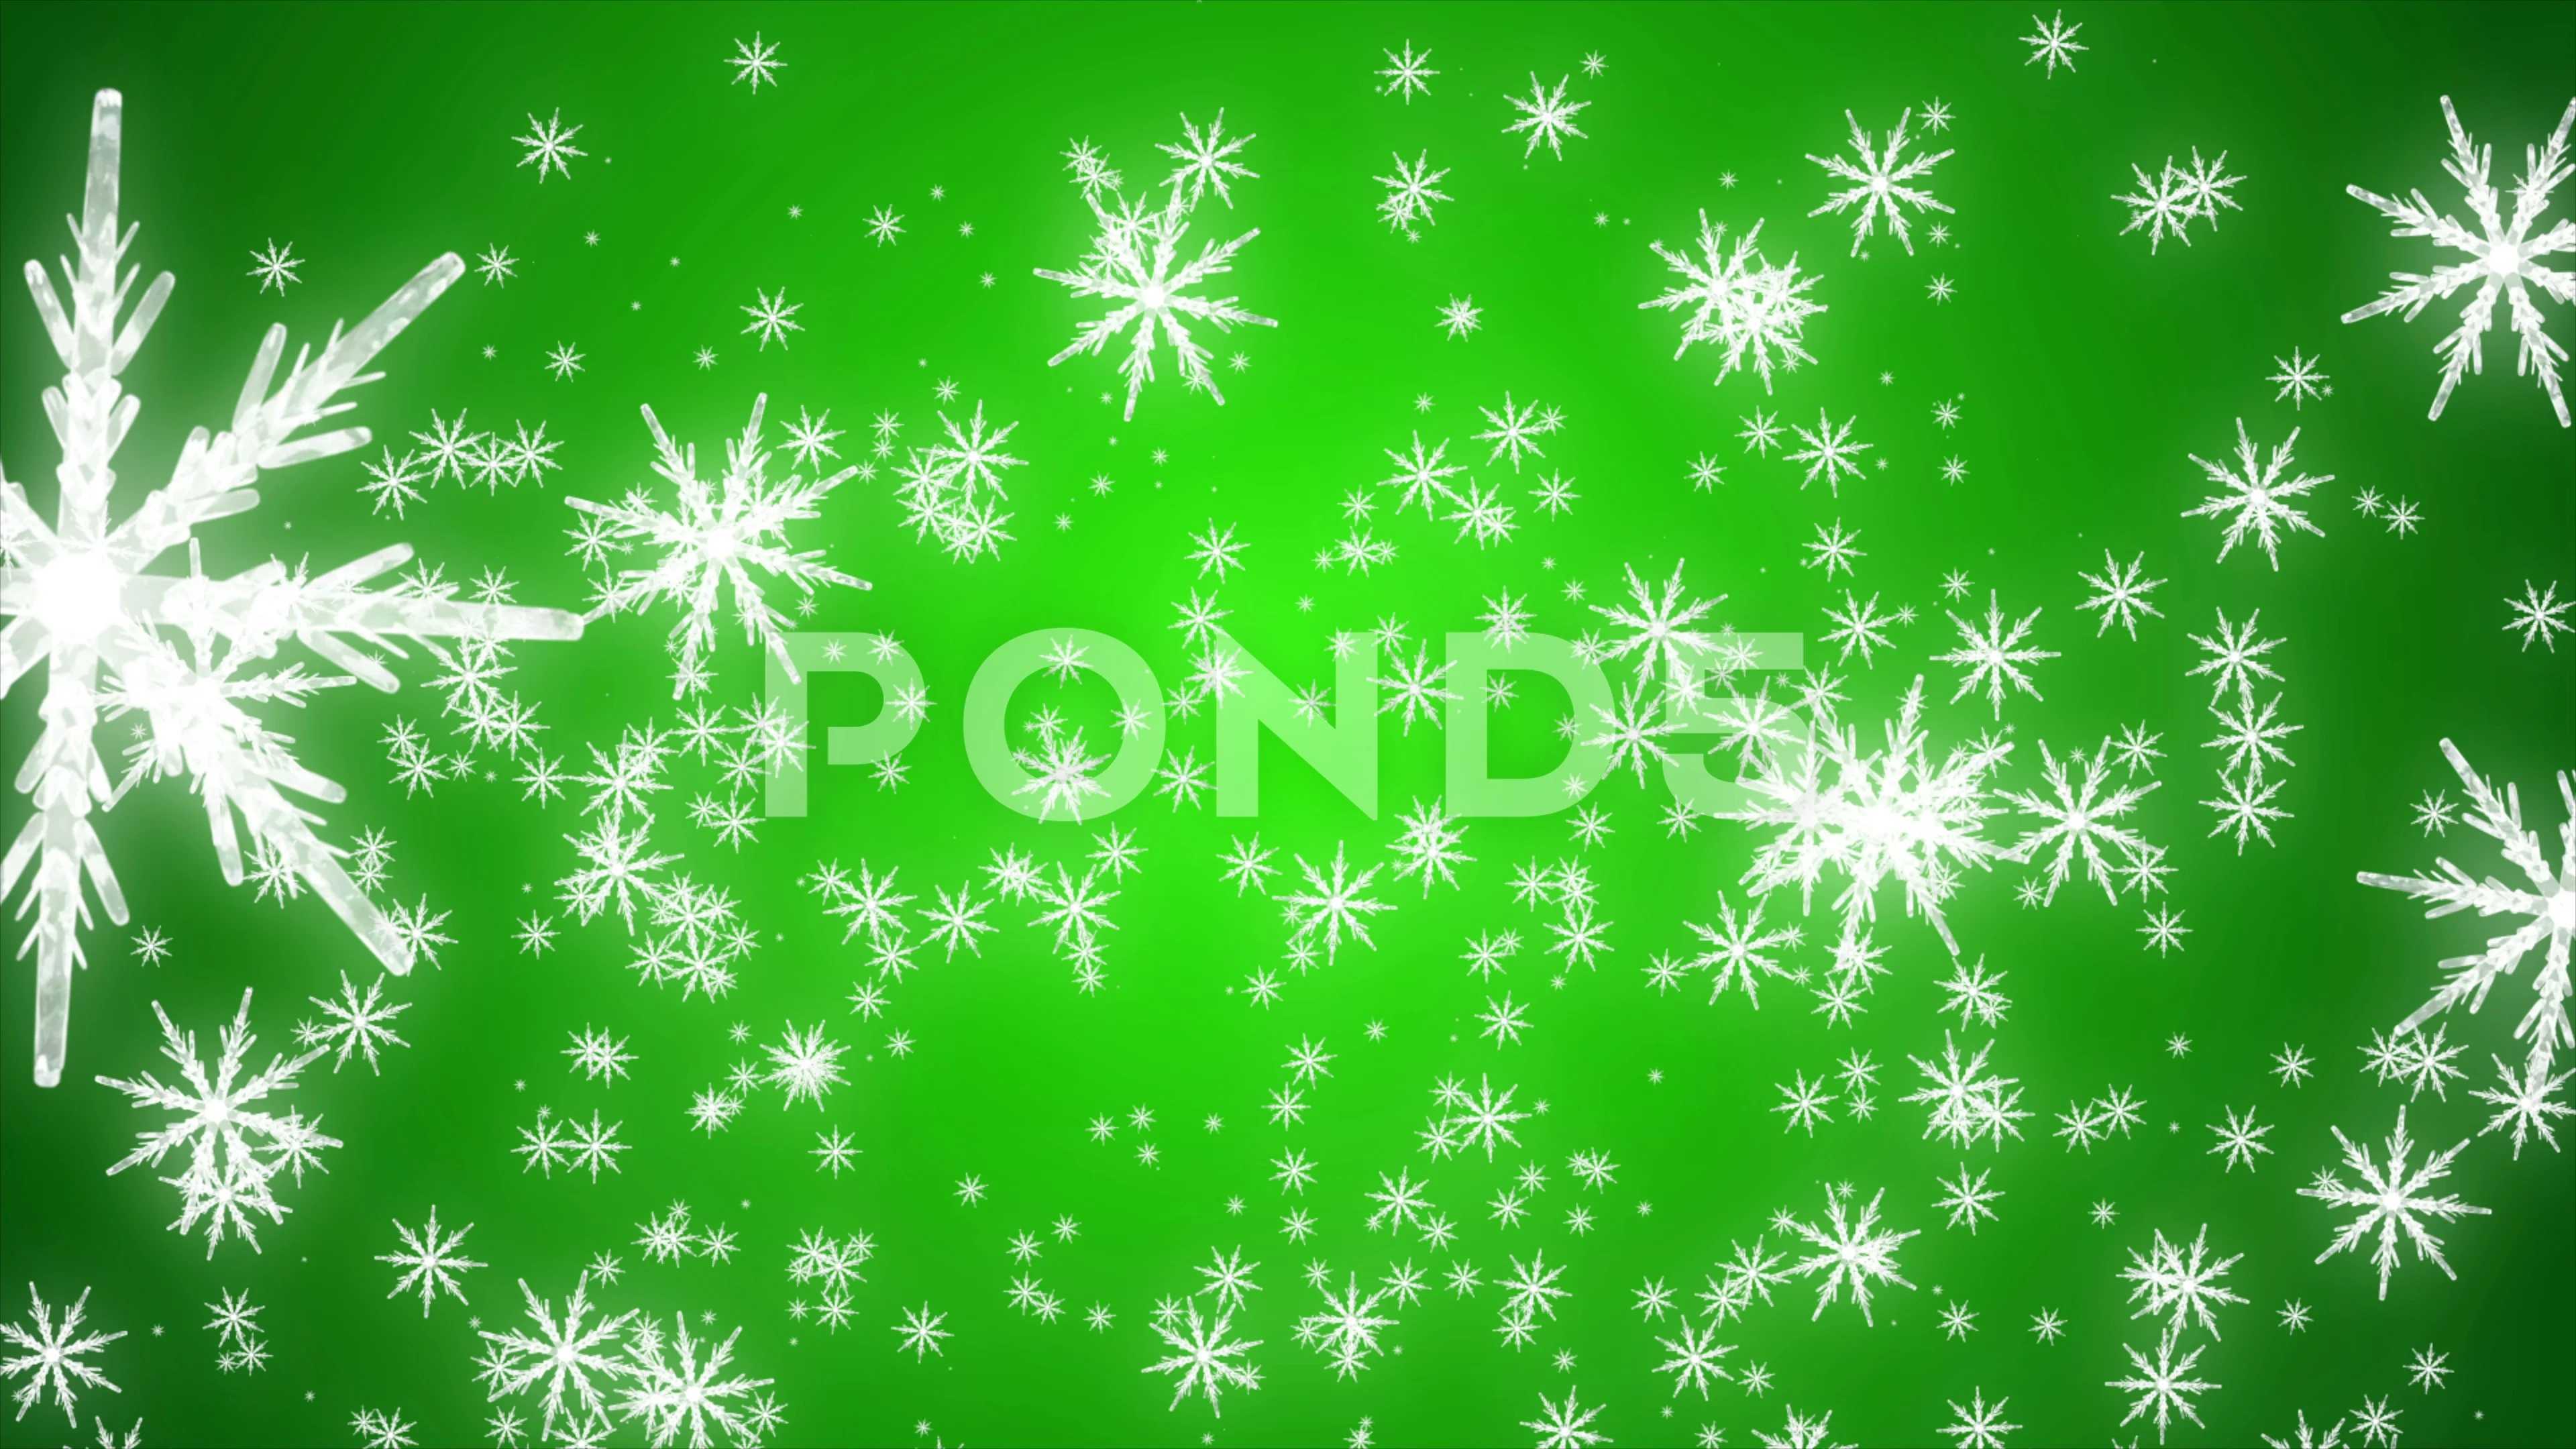 moving snow falling background